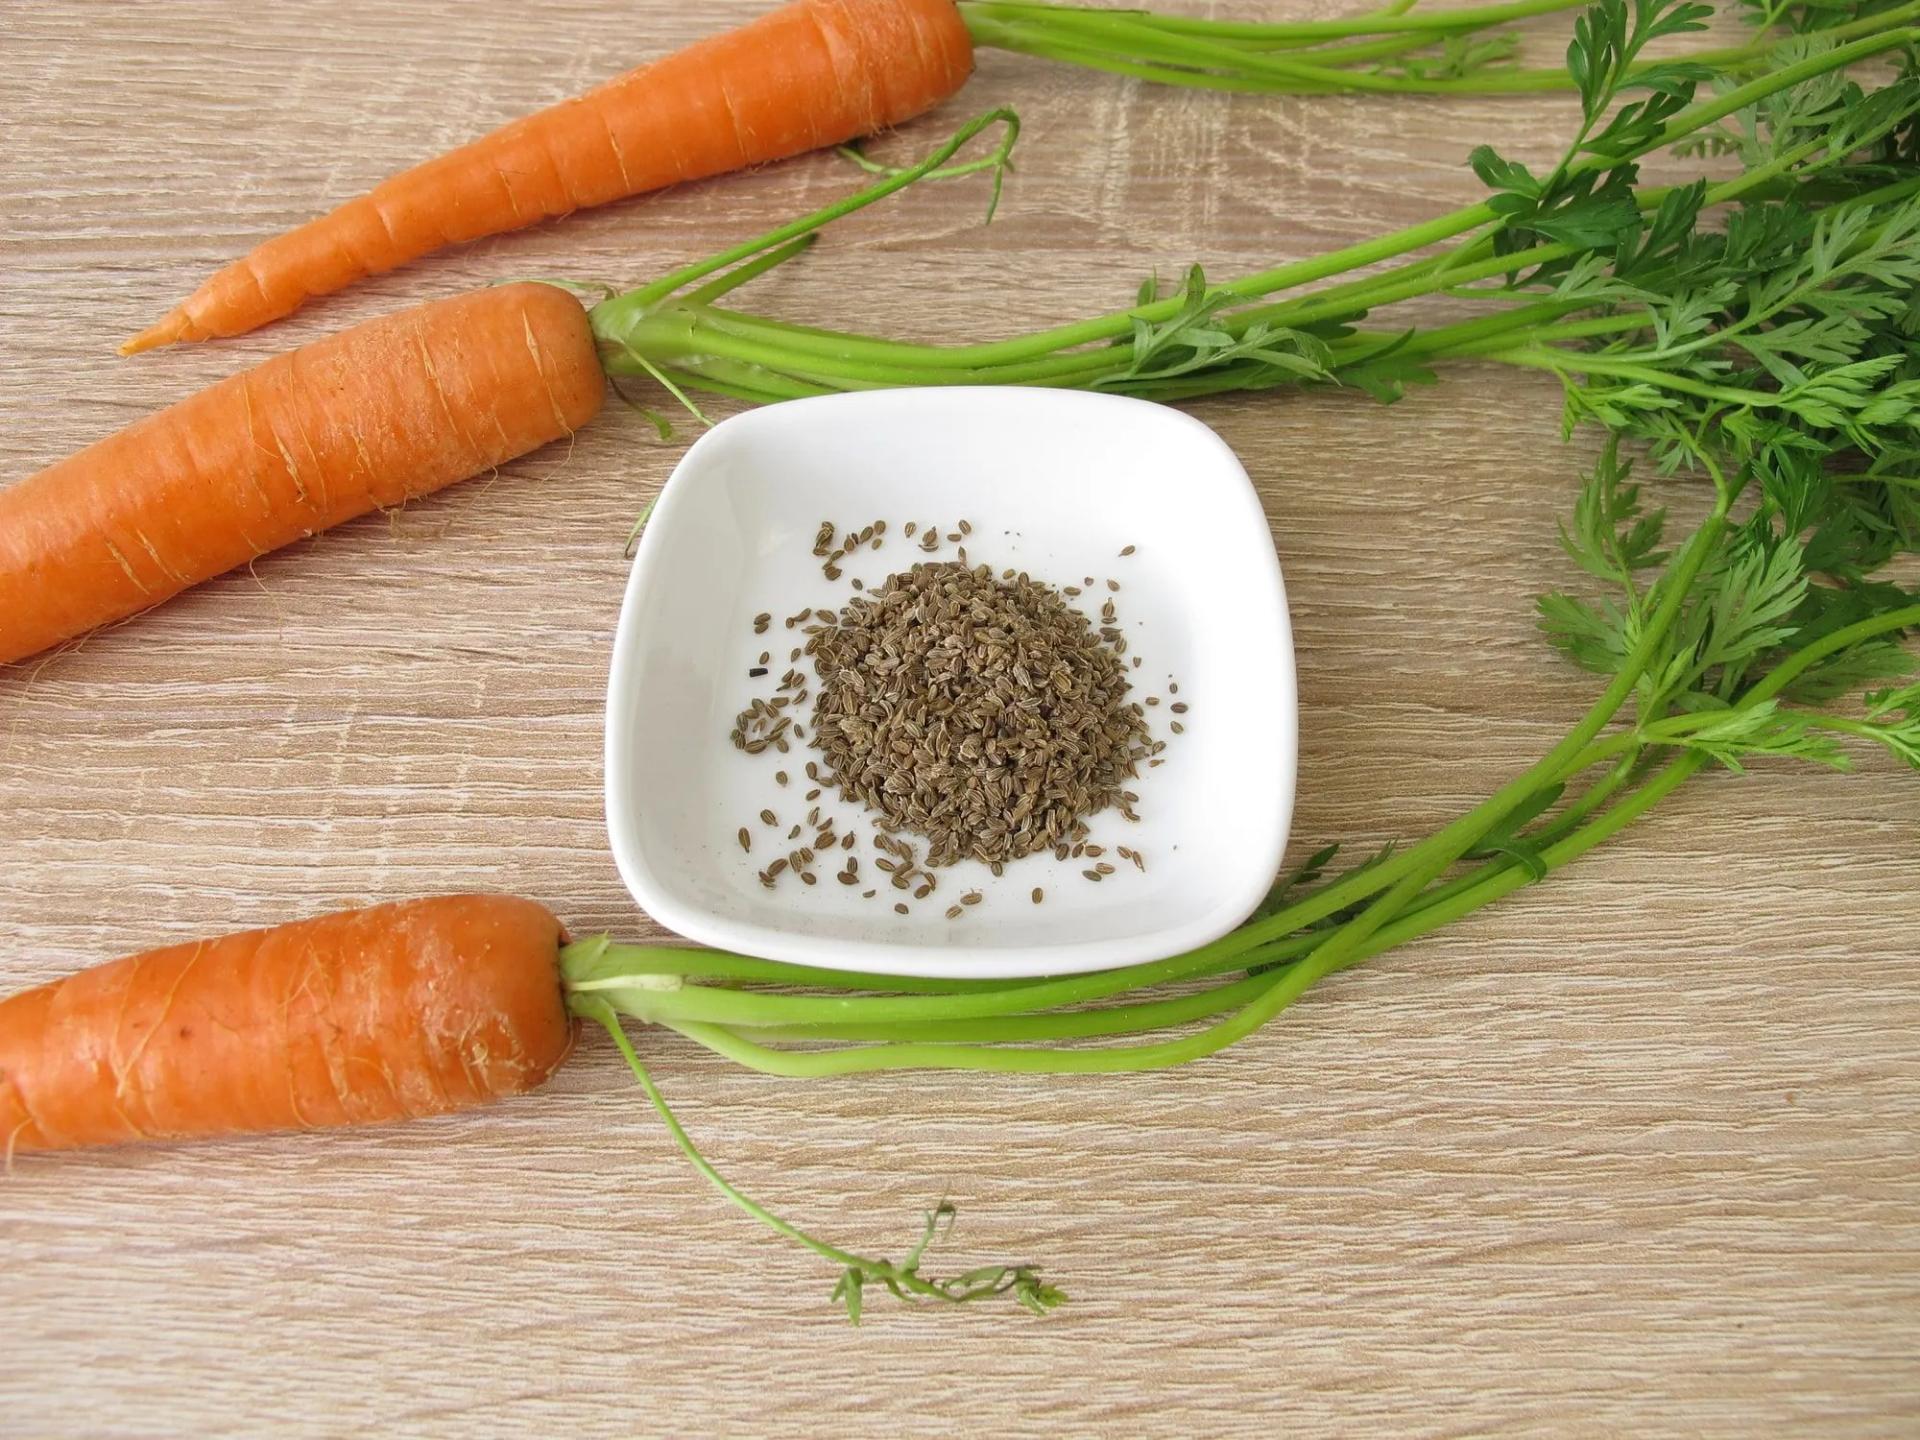 Carrot Seeds in the Bowl